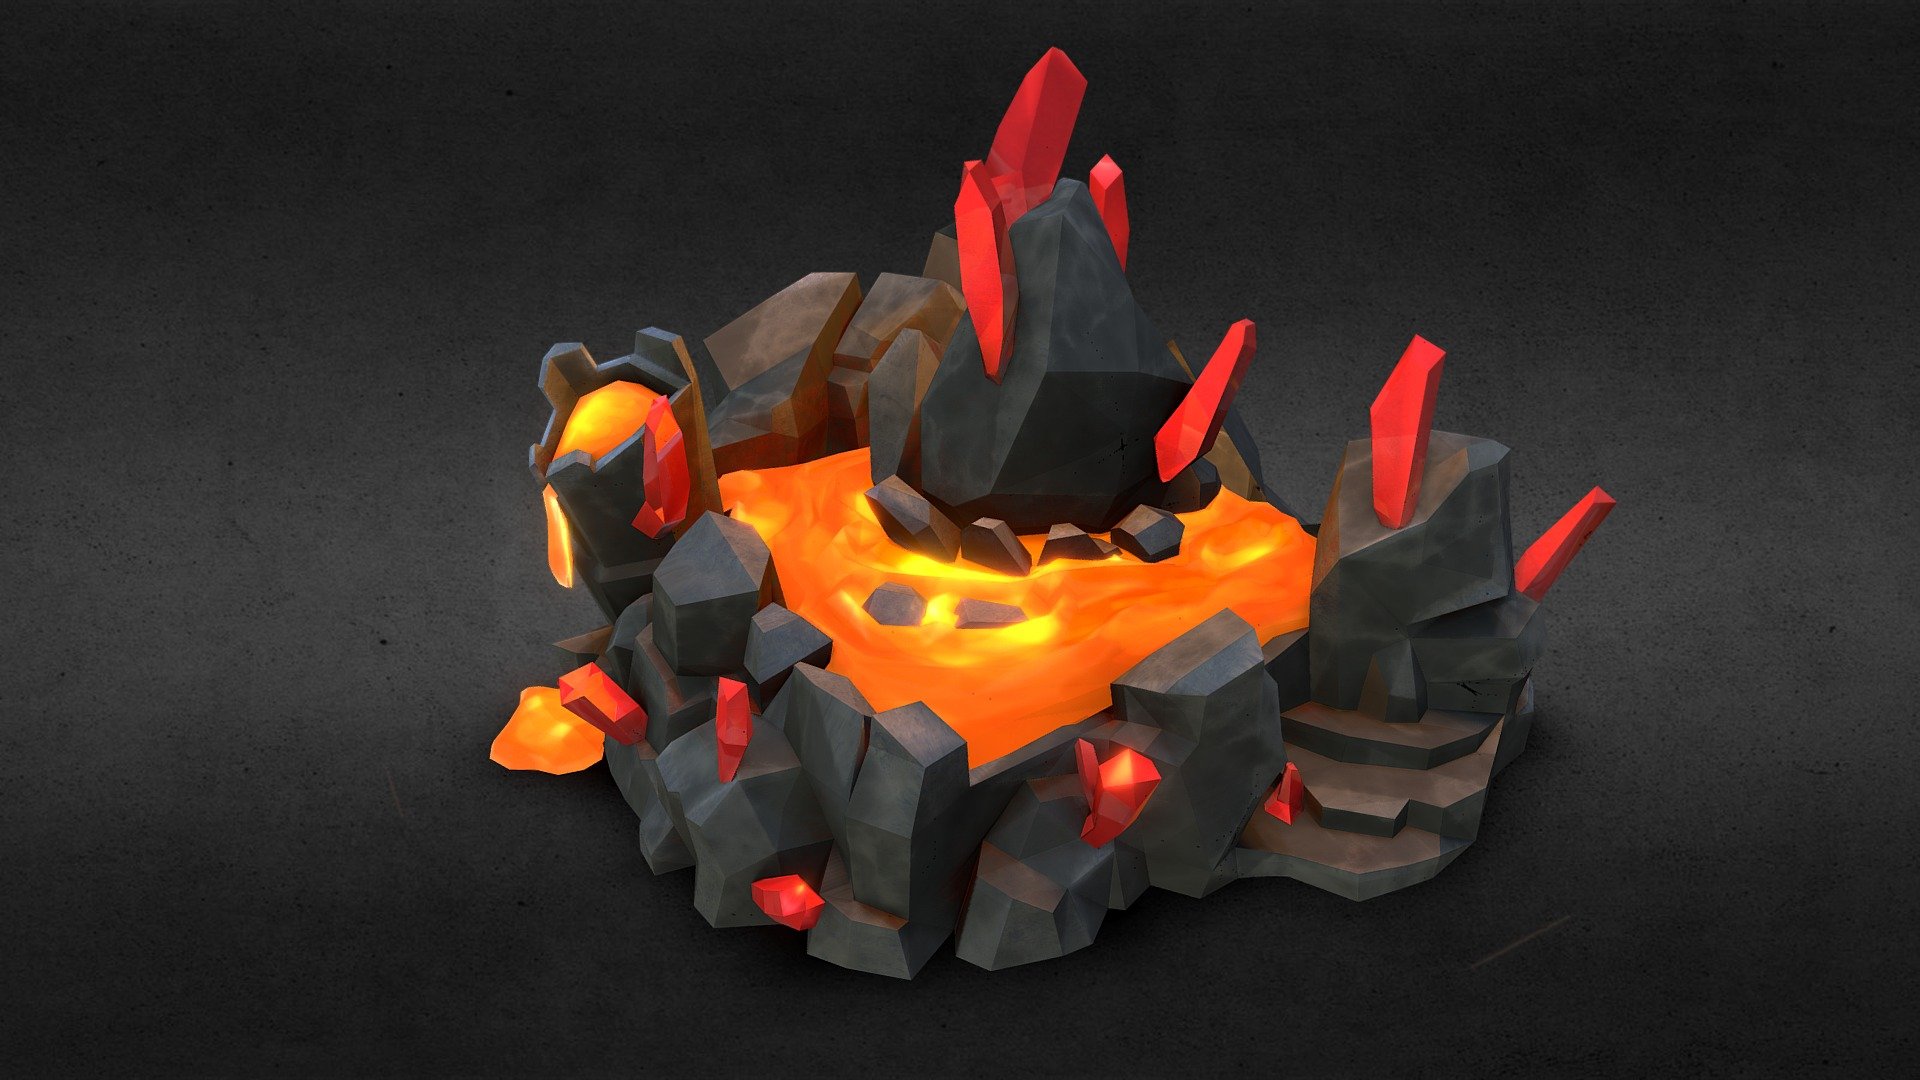 Poly Modeling : Spacedraw

Quick PBR : 3D-Coat - Volcanic Rocks (Done on a phone with Spacedraw) - 3D model by hansolocambo 3d model